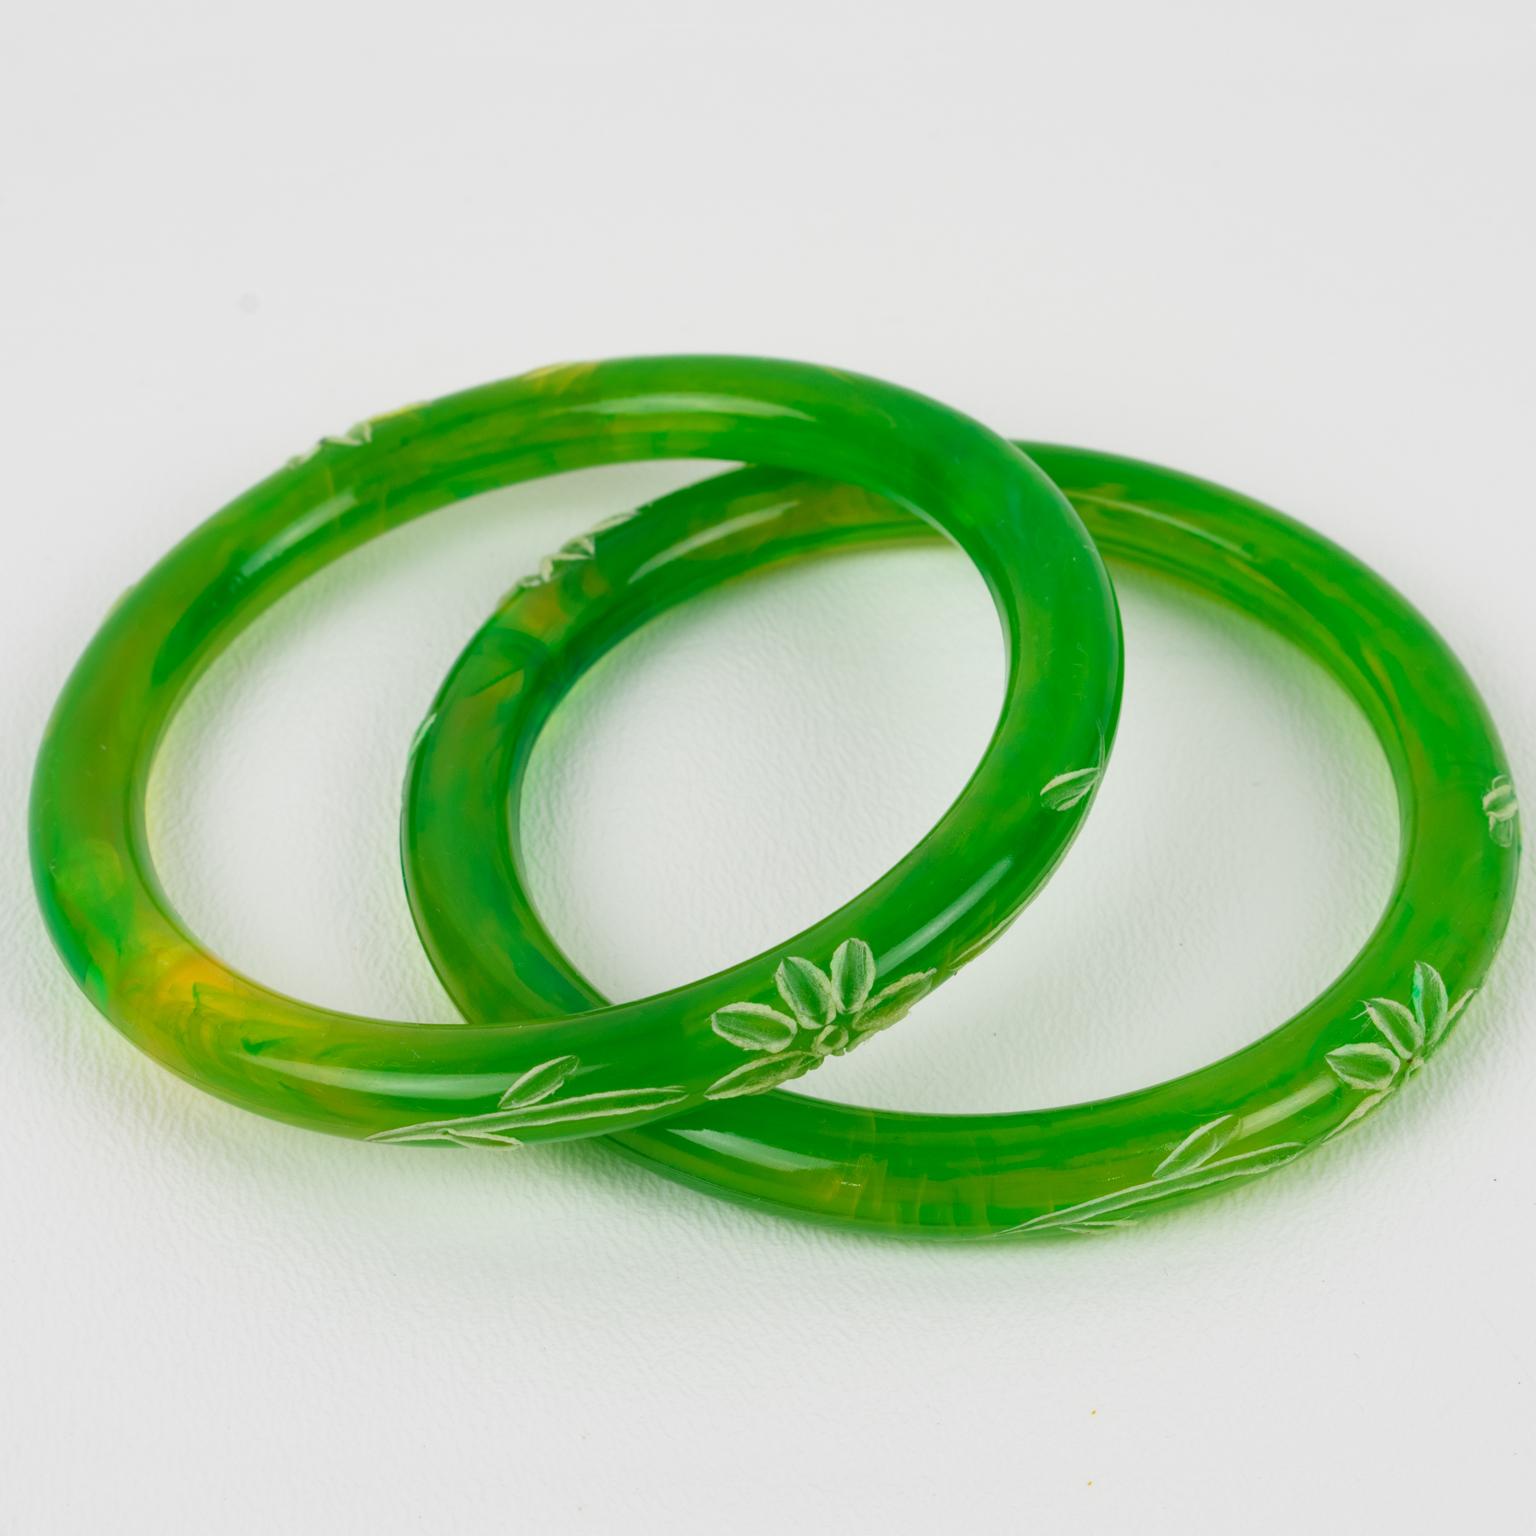 This is a lovely Lucite spacer bracelet bangle, a set of 2 pieces. The Lucite bangles are designed with a domed shape and boast a green grass swirl color with floral carving all around them. There is no visible maker's mark.
Measurements: Inside